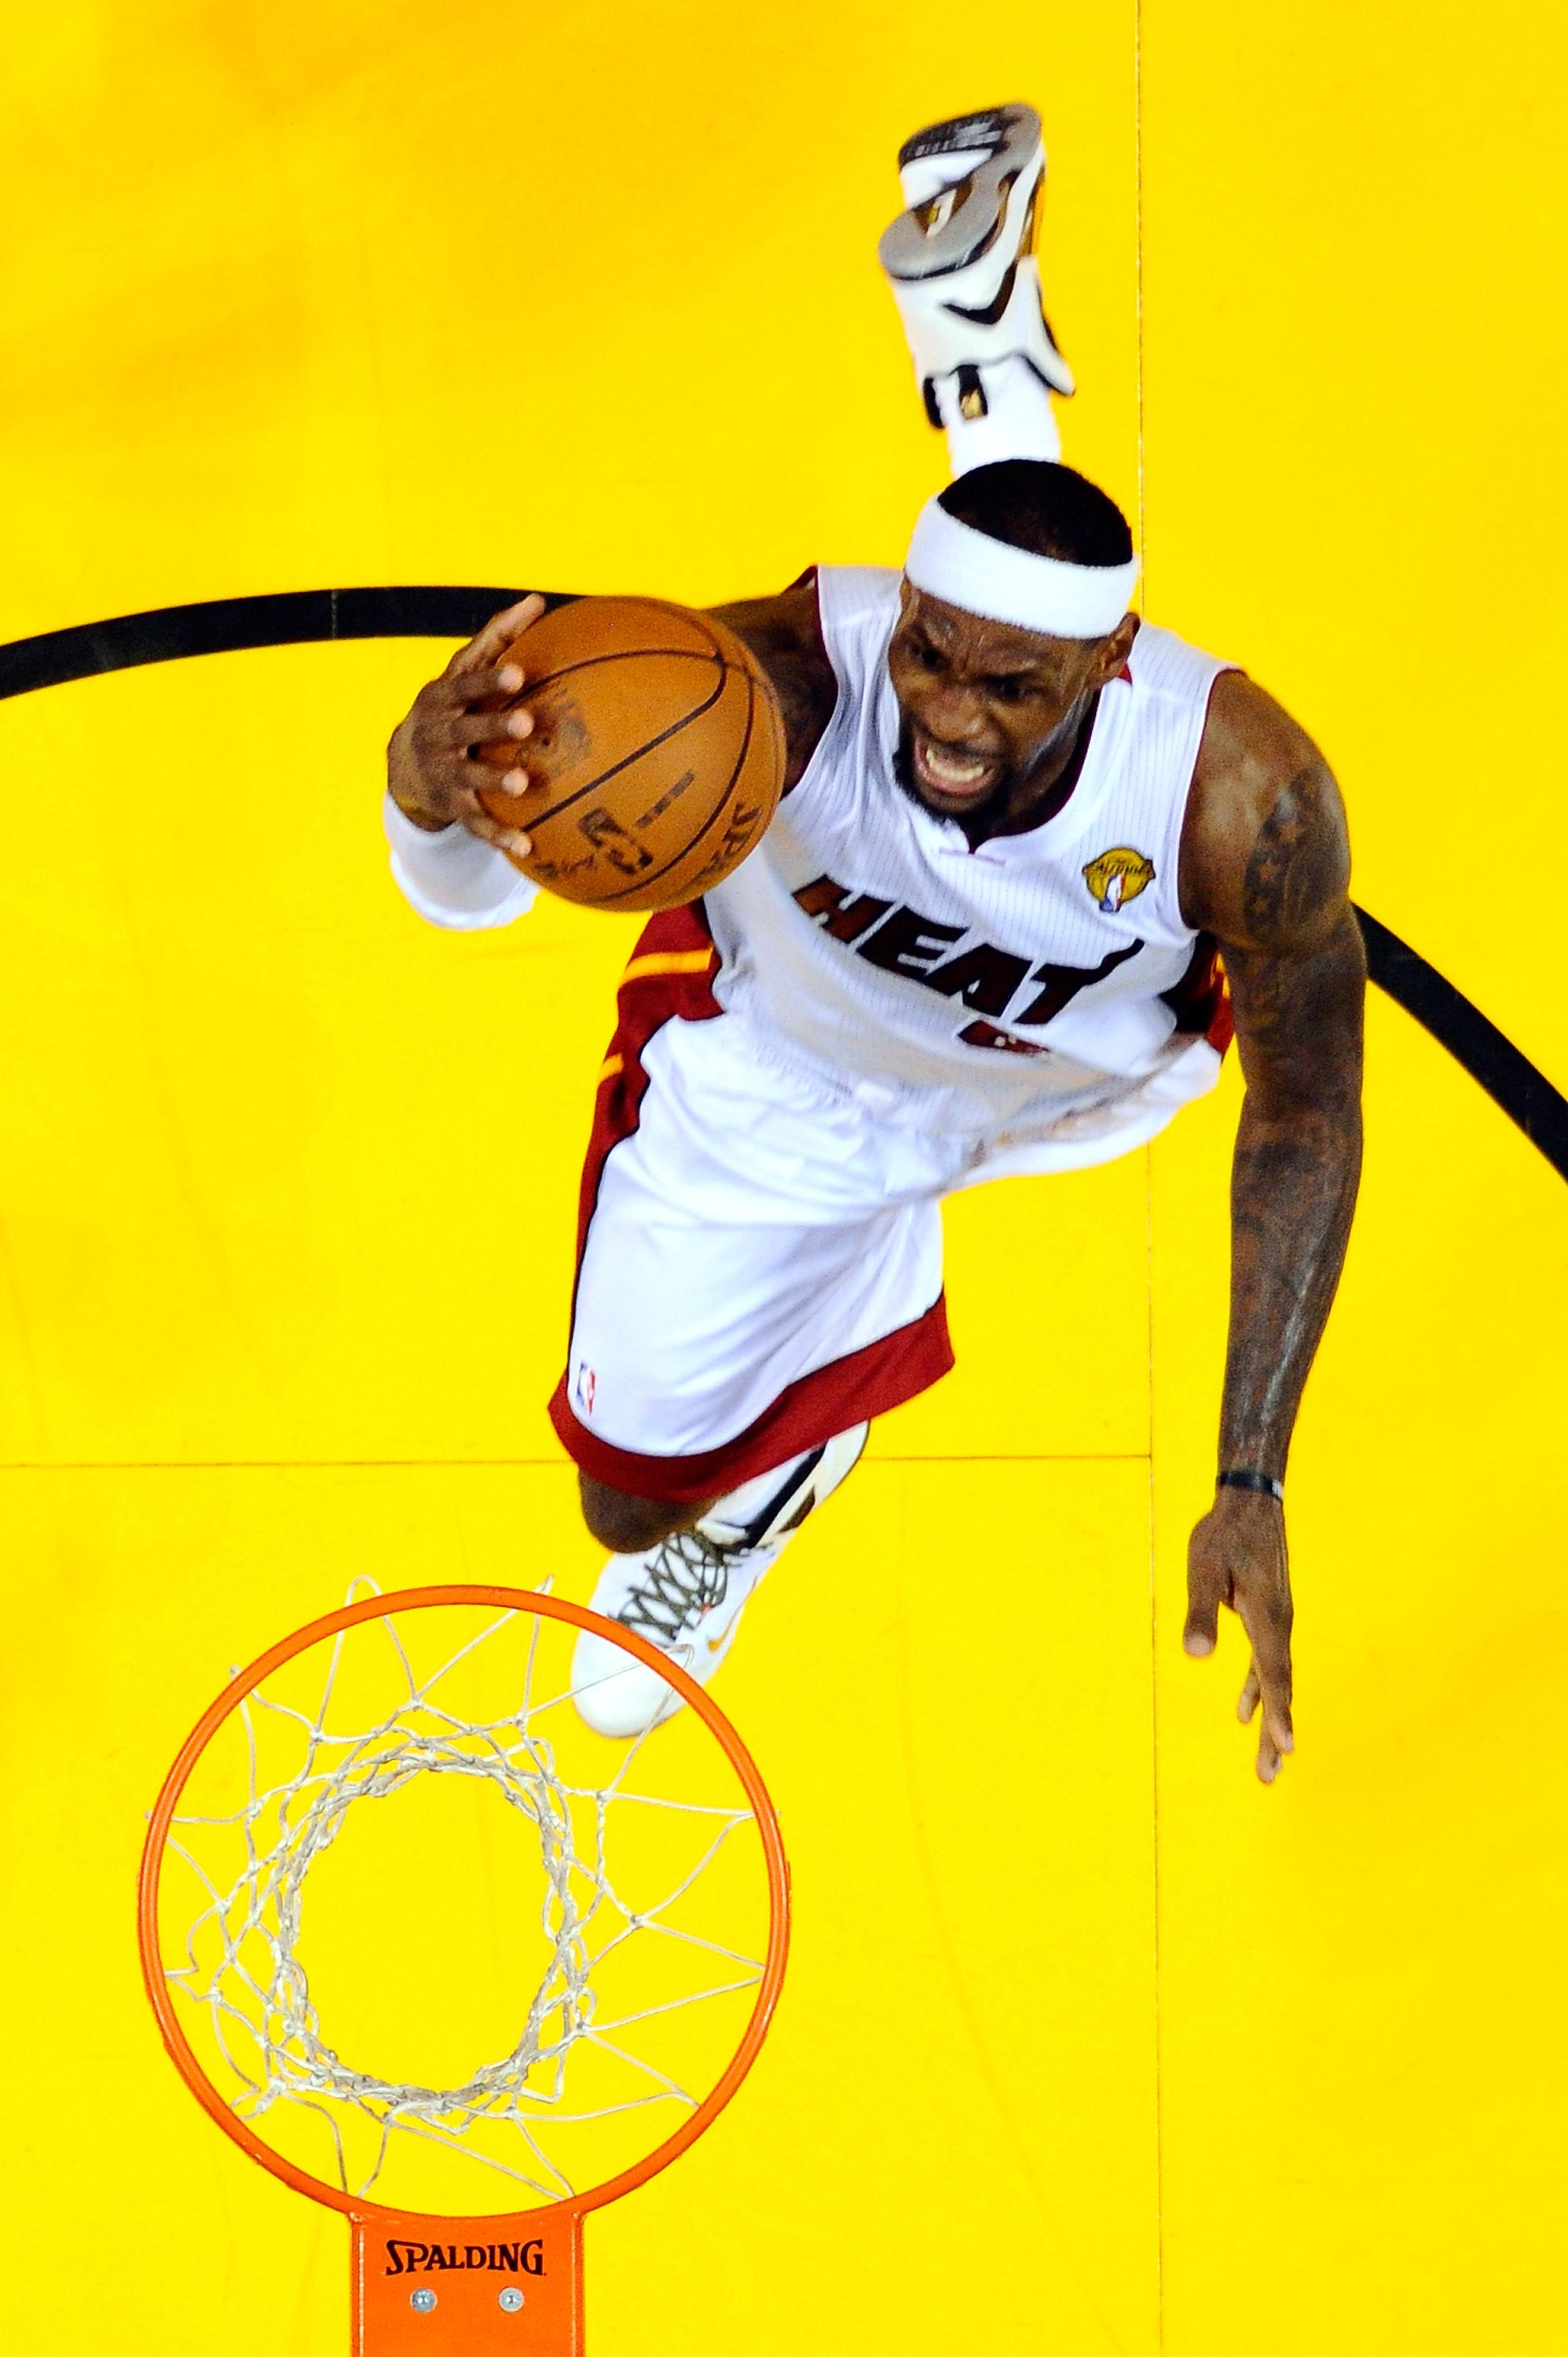 LeBron James becomes highest-paid player in NBA history